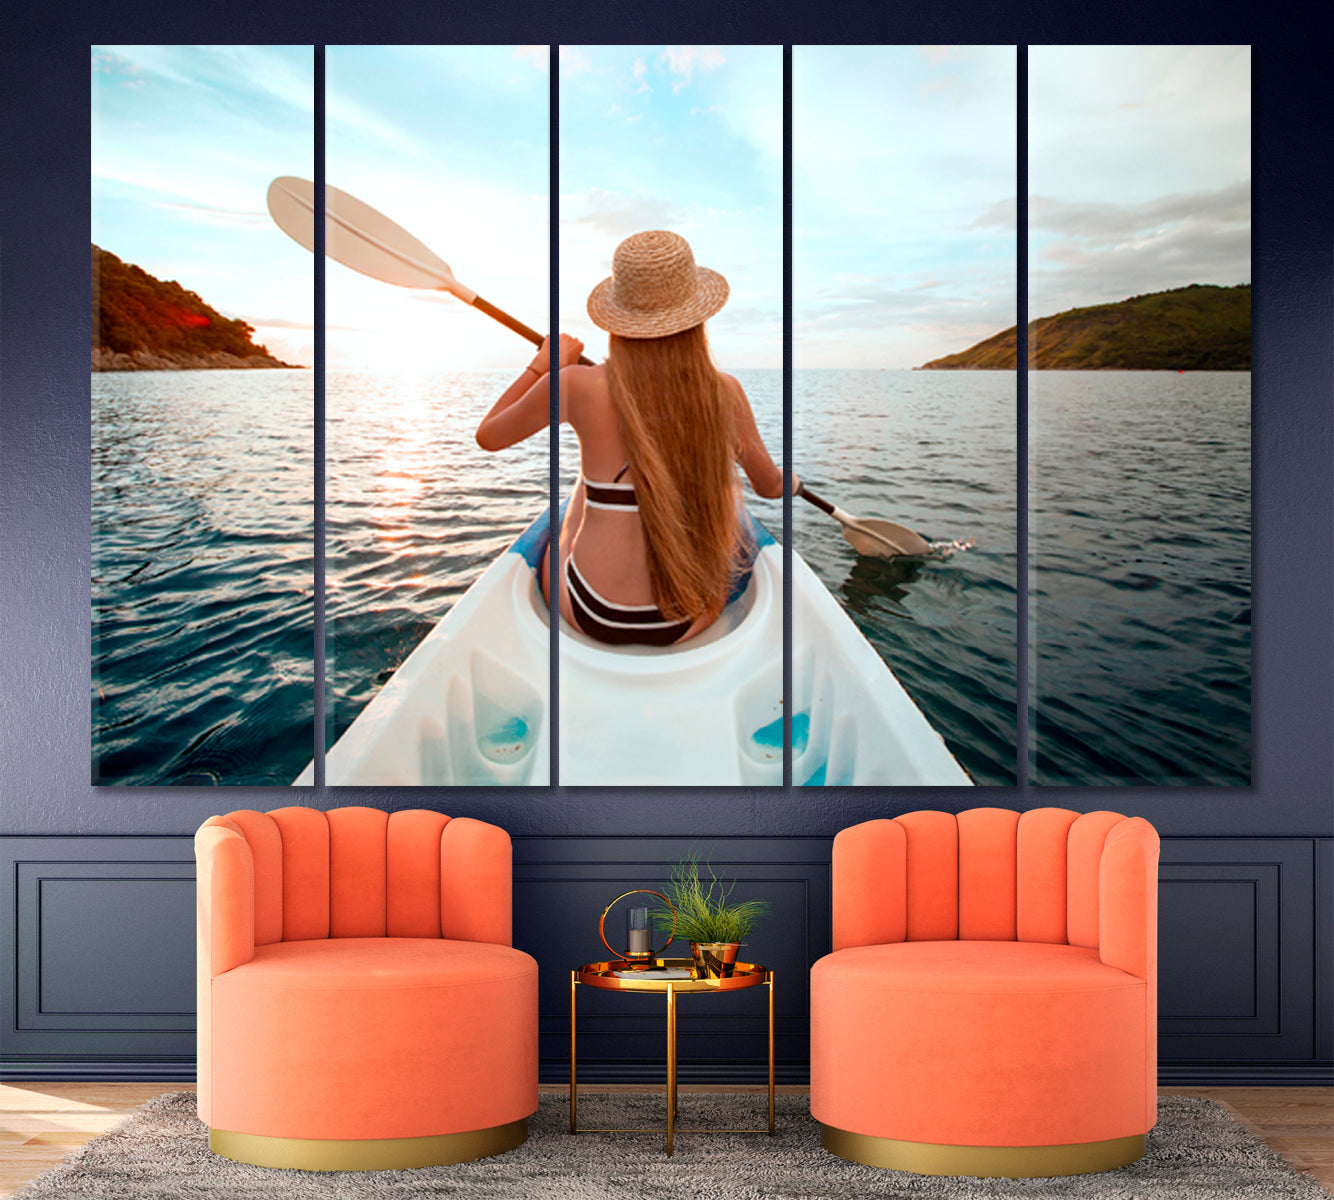 ADVENTURE Canoe Kayak Young Woman Boat Water Sport Active Lifestyle Concept Traveling Around Ink Canvas Print Artesty 5 panels 36" x 24" 